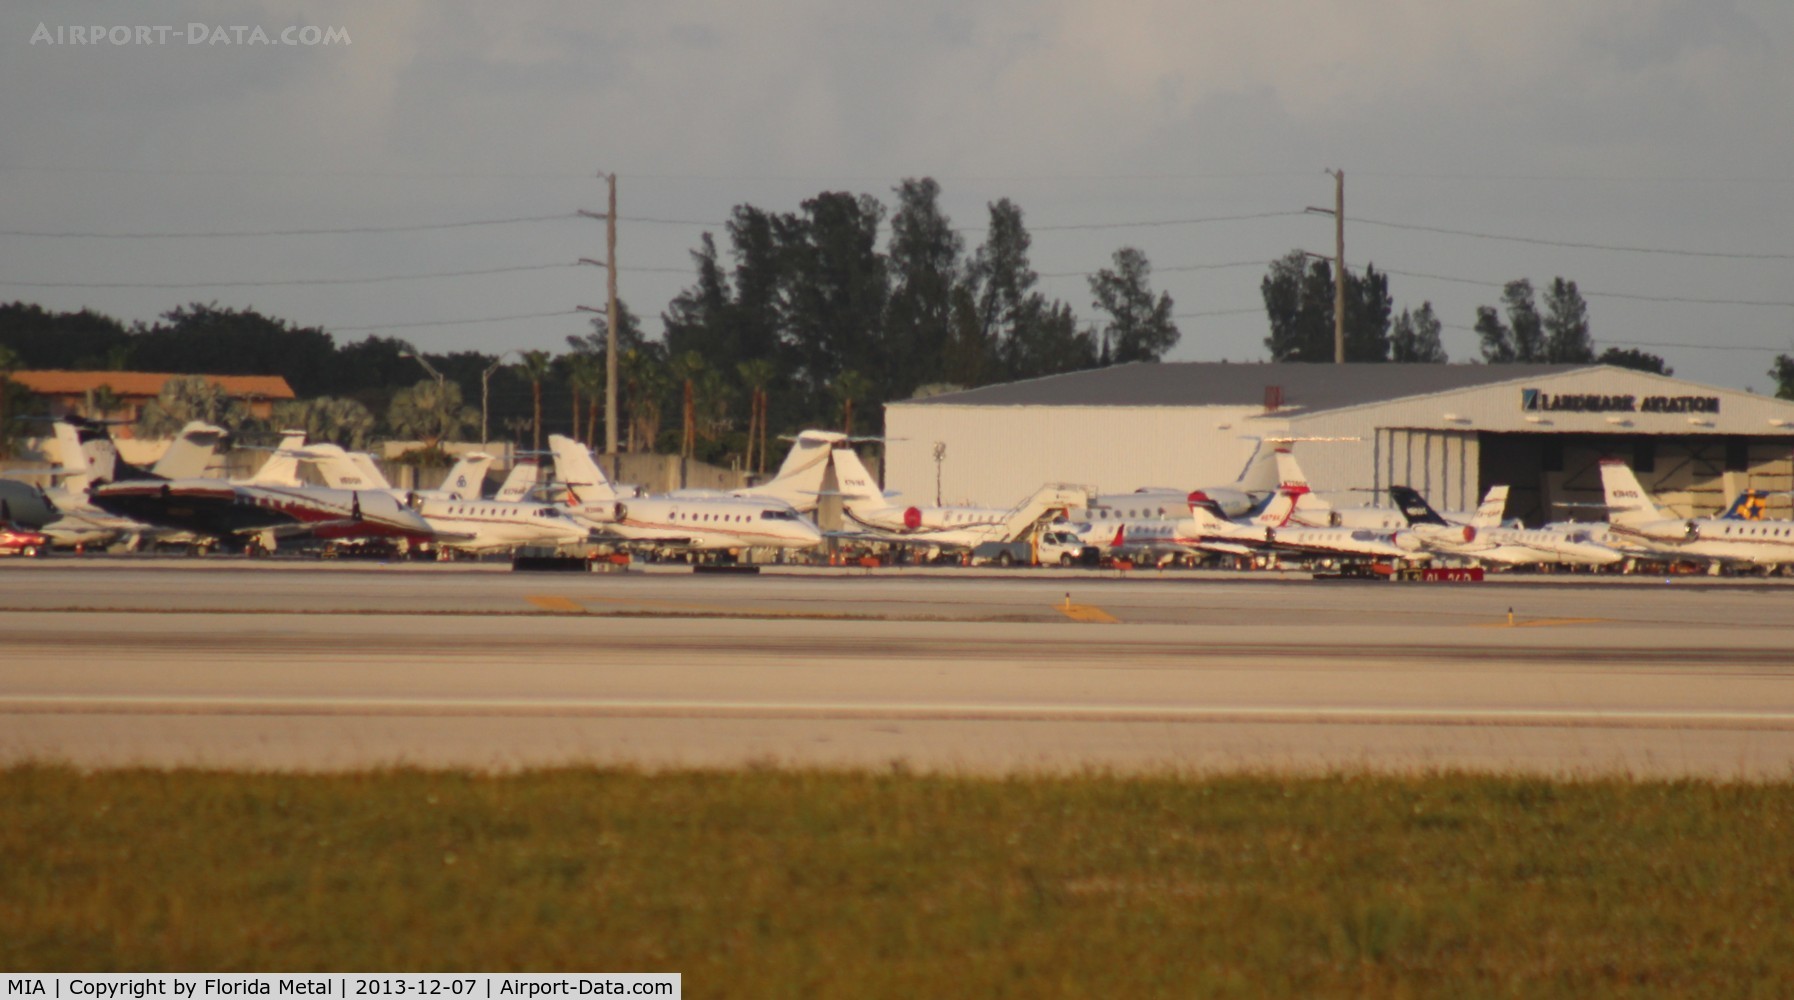 Miami International Airport (MIA) - More crowded ramps at Landmark Aviation FBO for the art show 